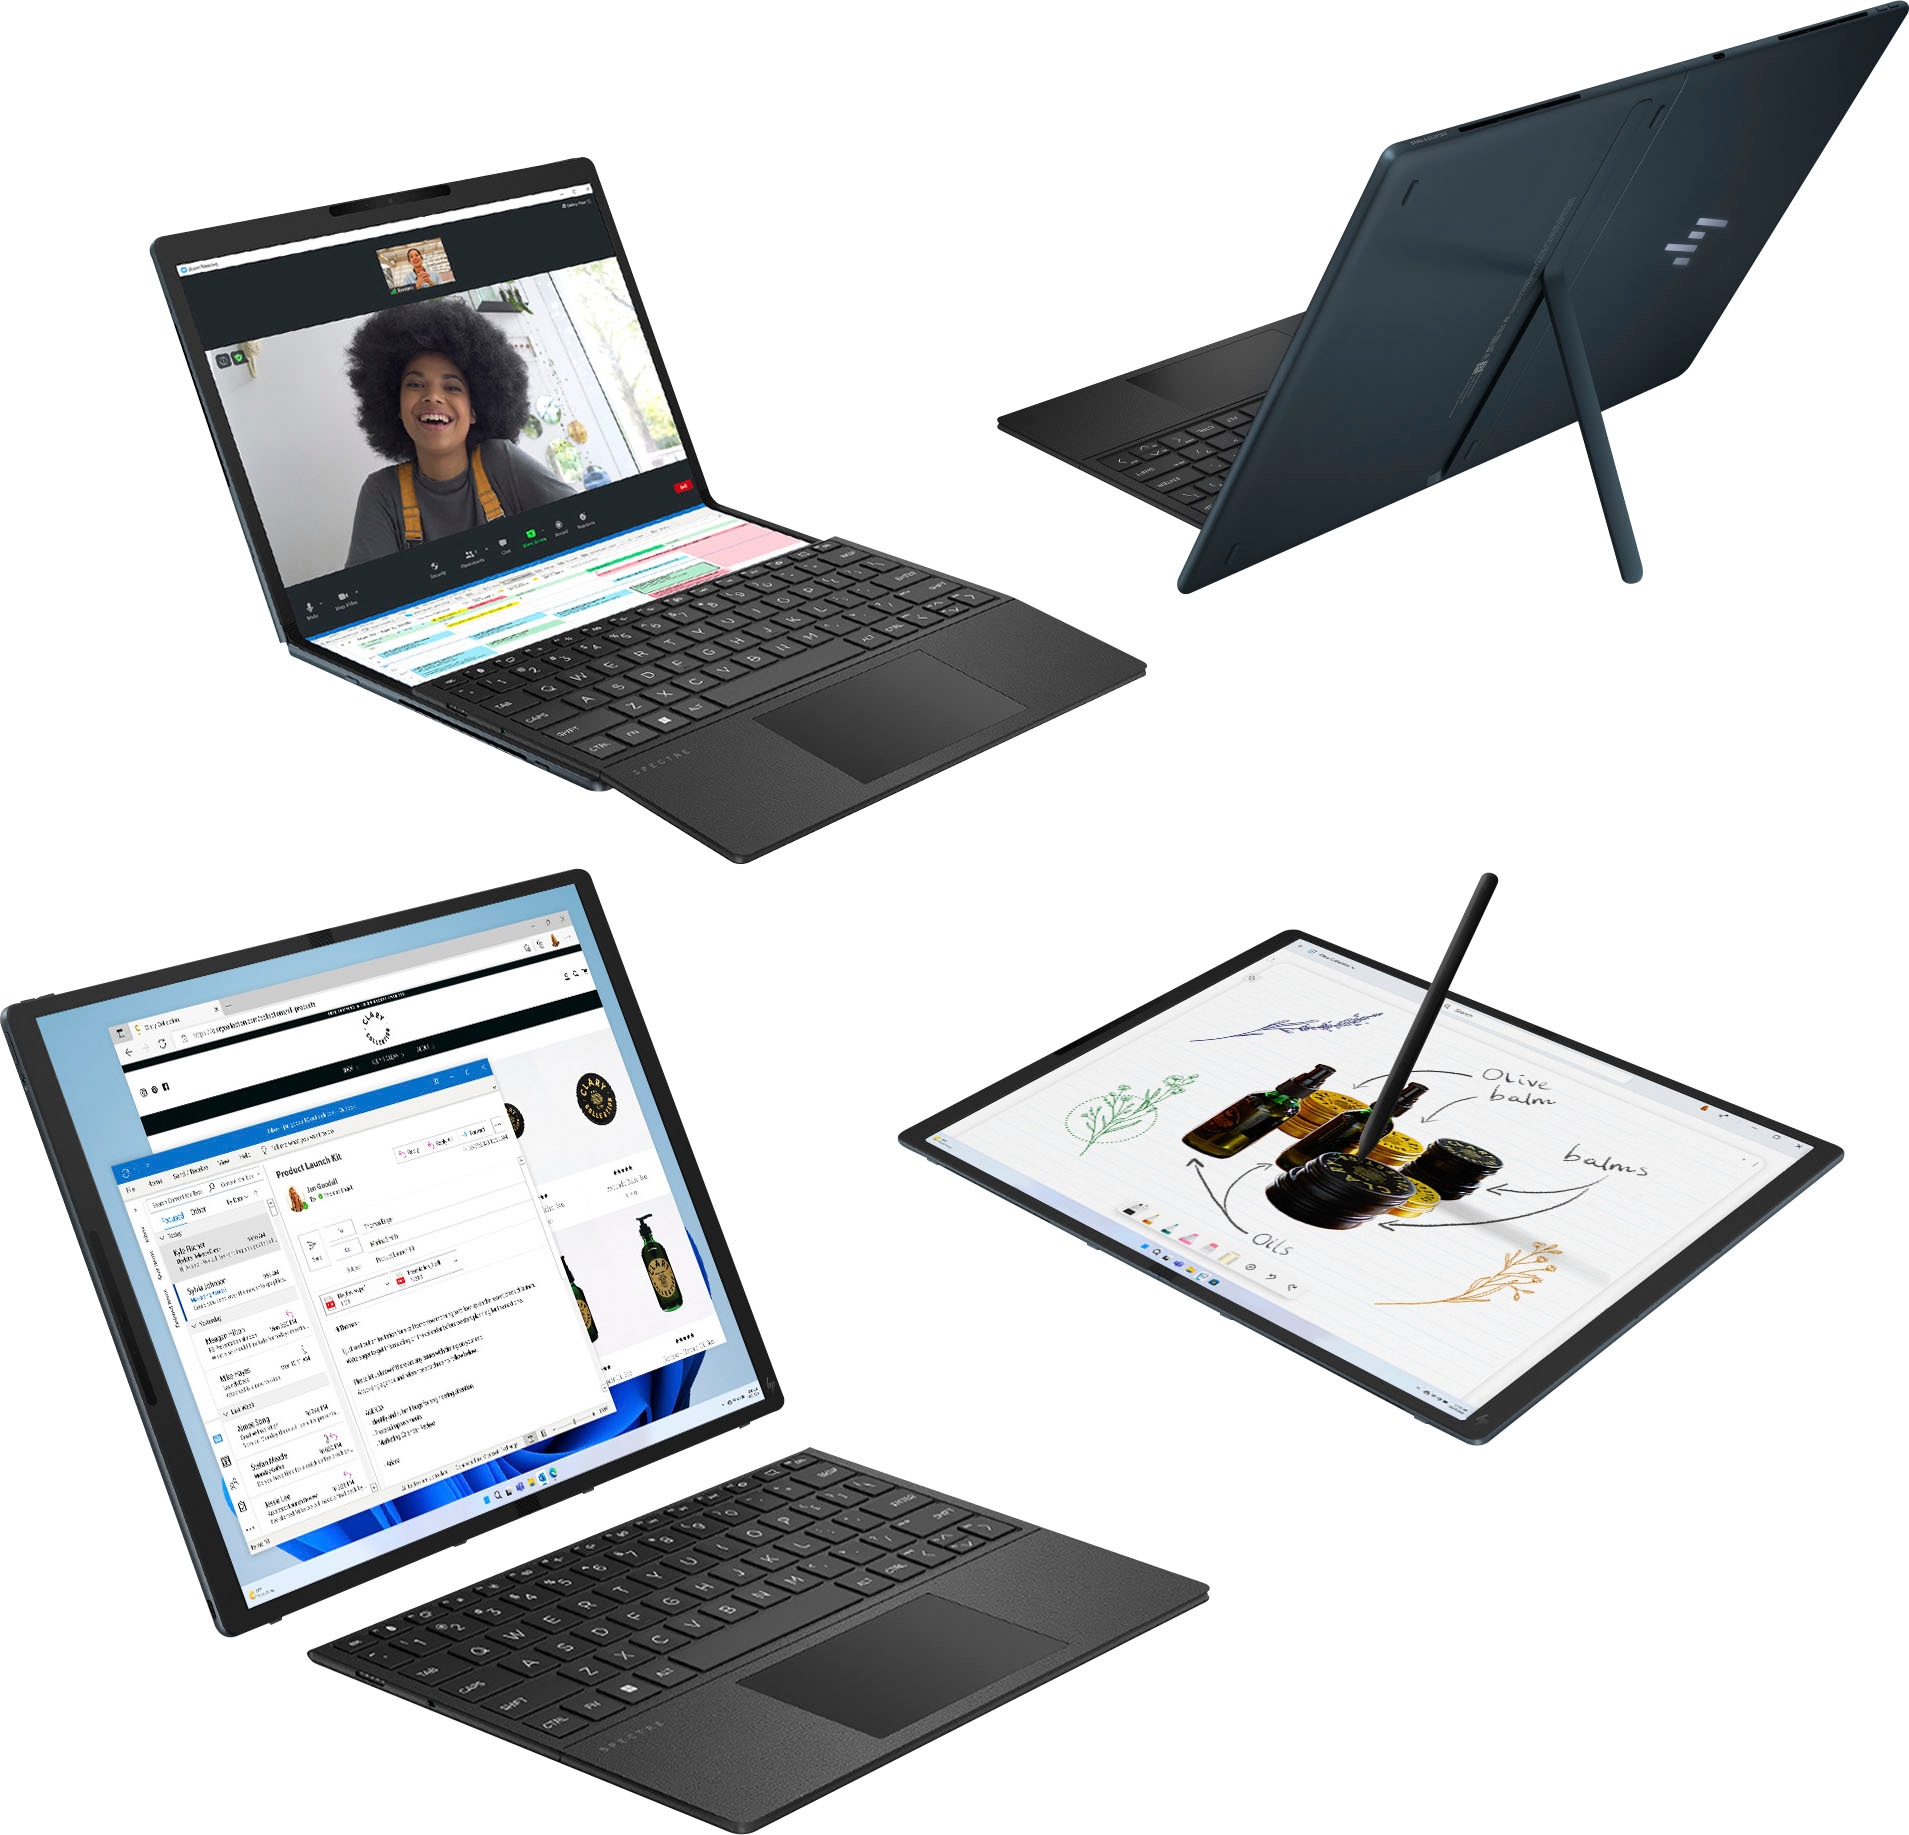 HP Unveils the New HP Spectre Foldable PC